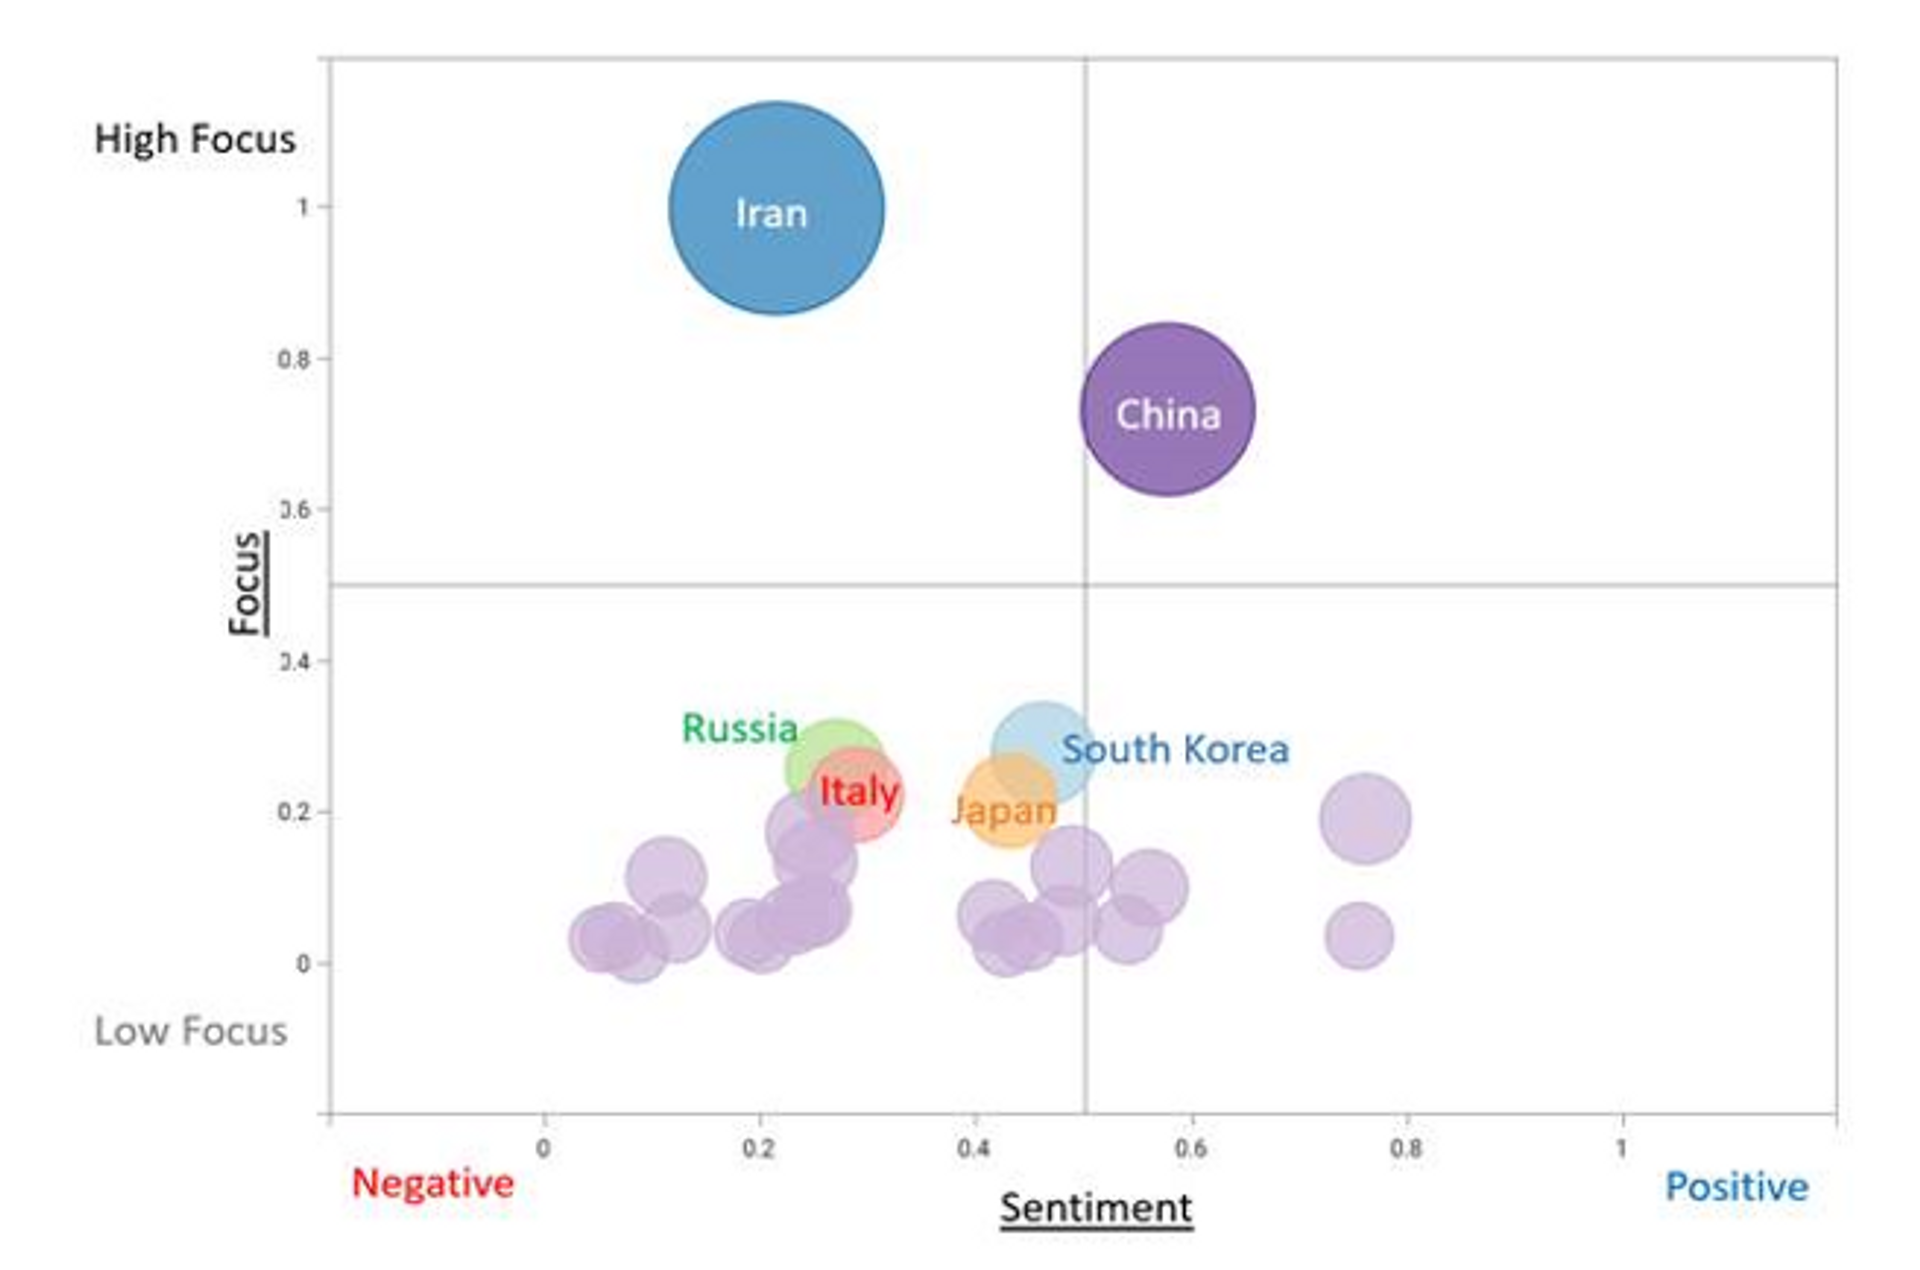 A data visualisation showing sentiment against focus for various countries